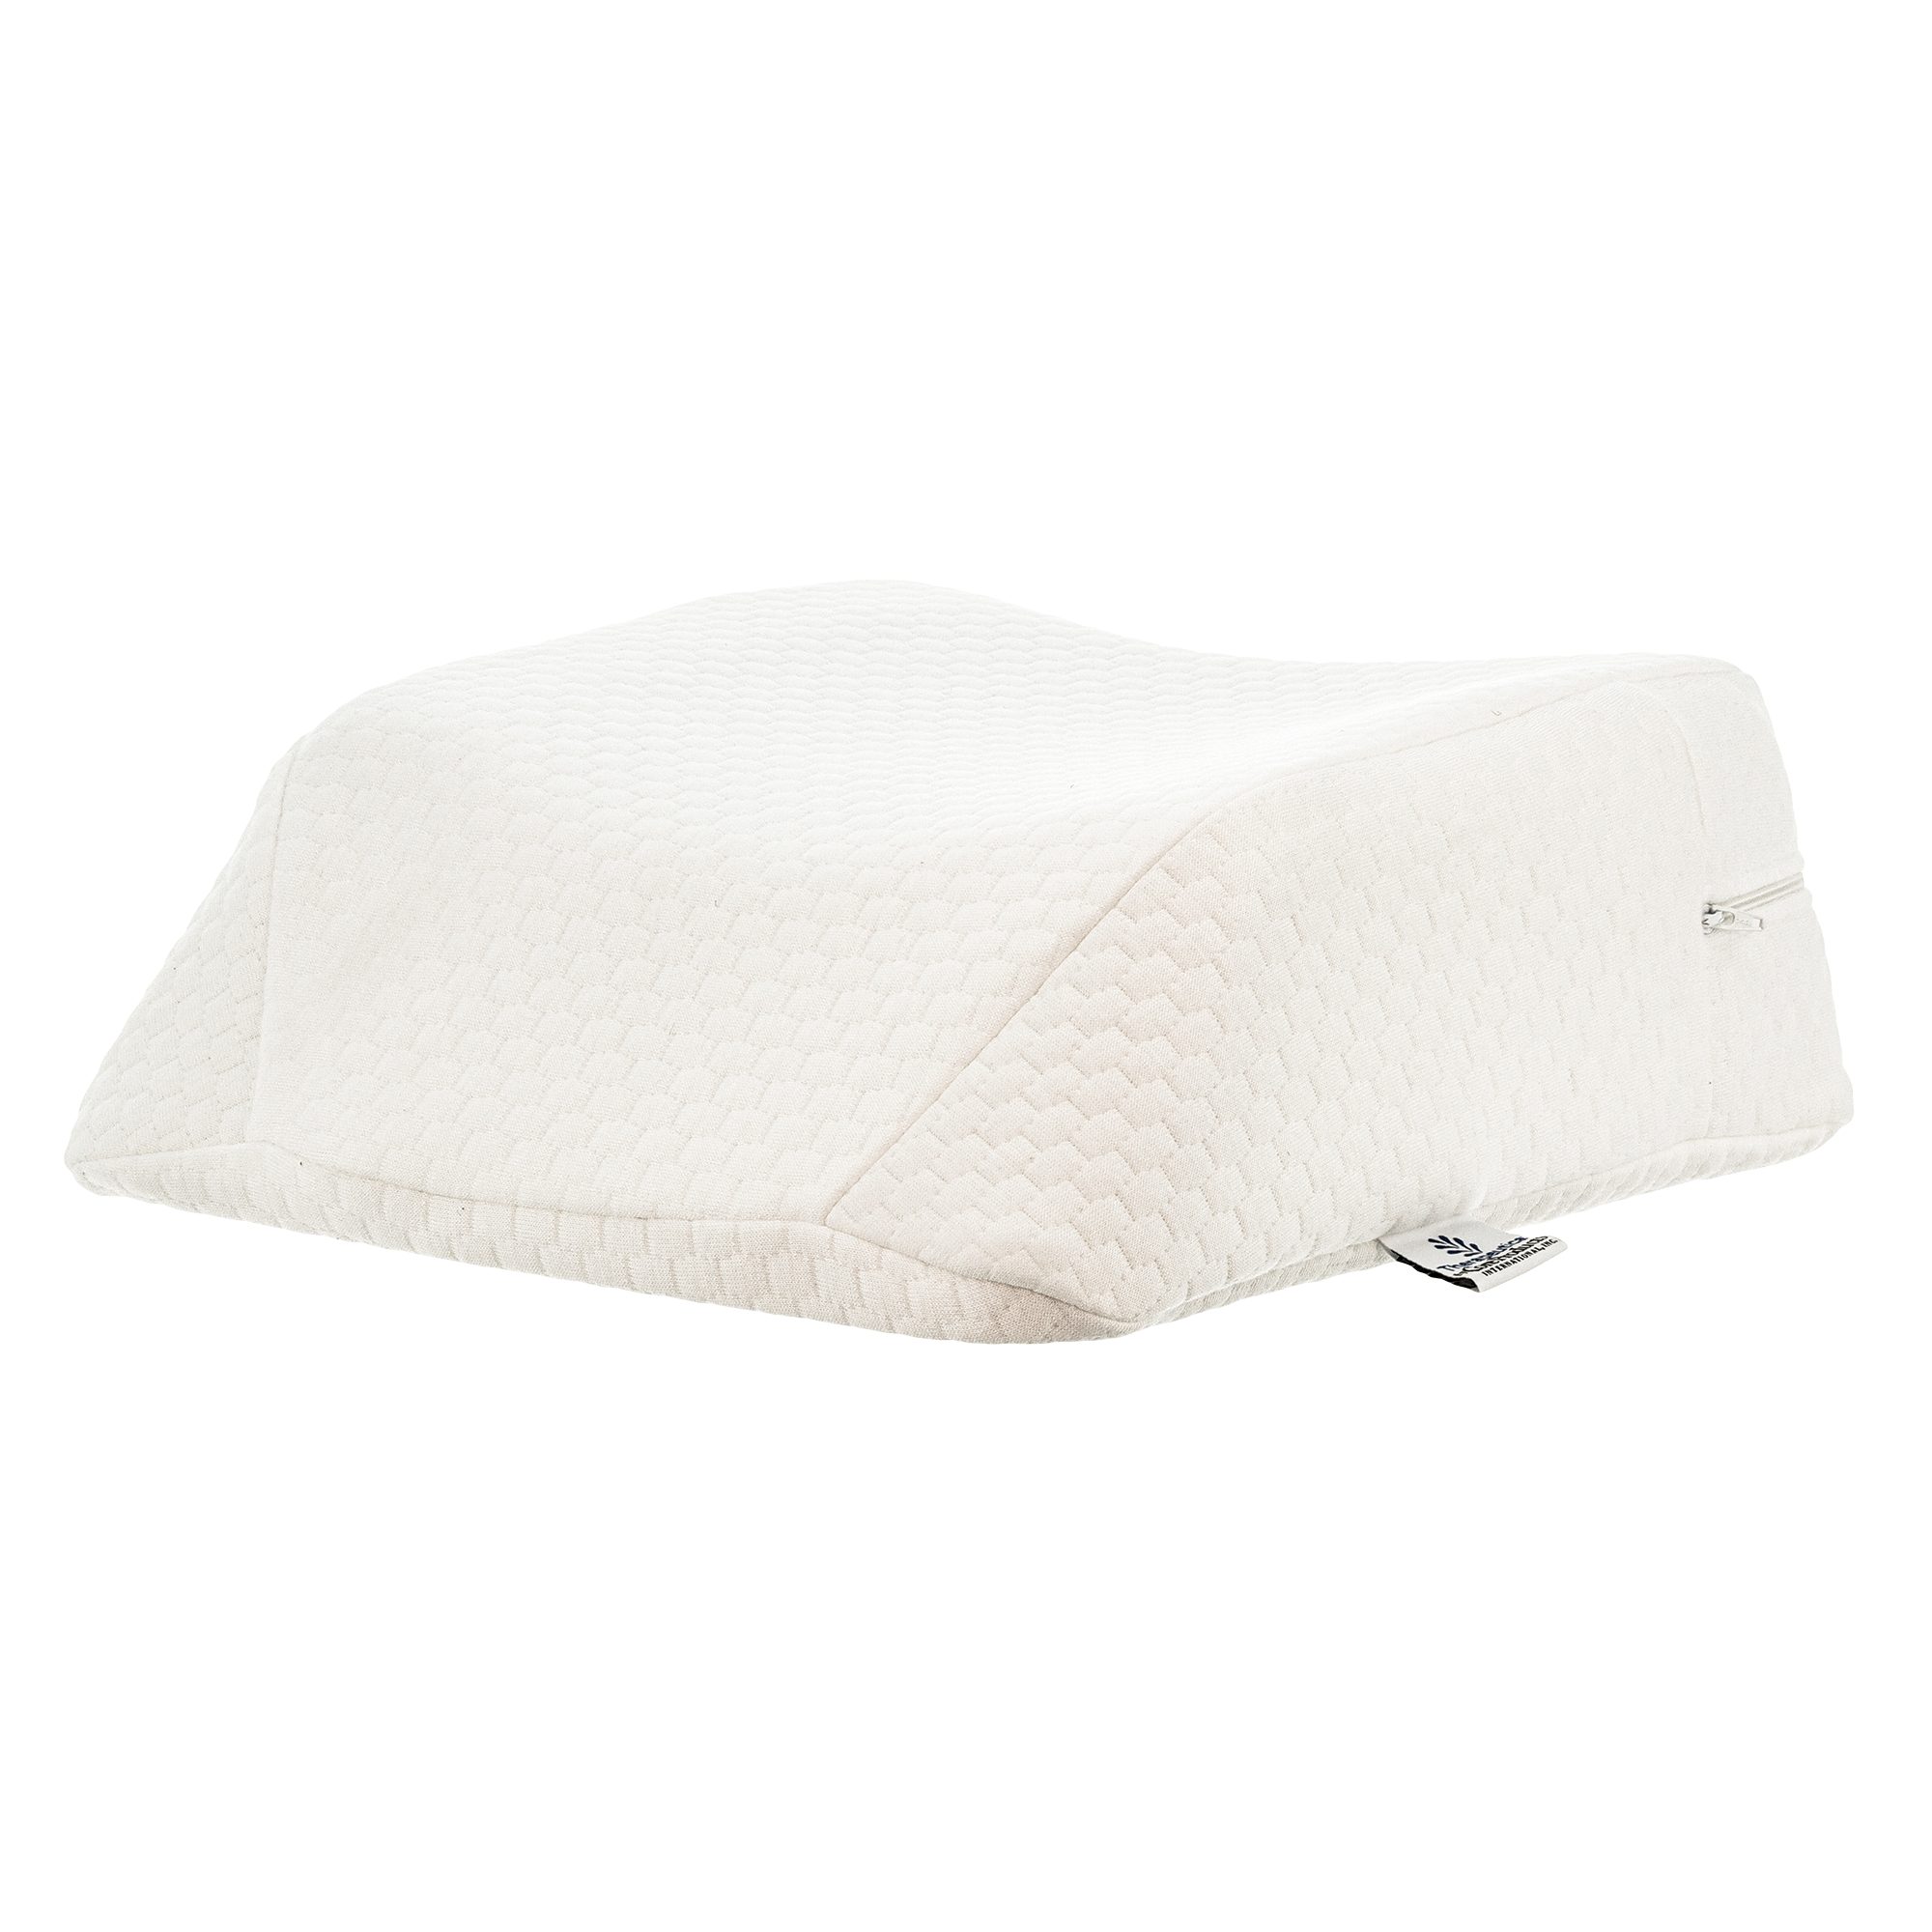 Therapeutica Travel Pillow Cover - physio supplies canada